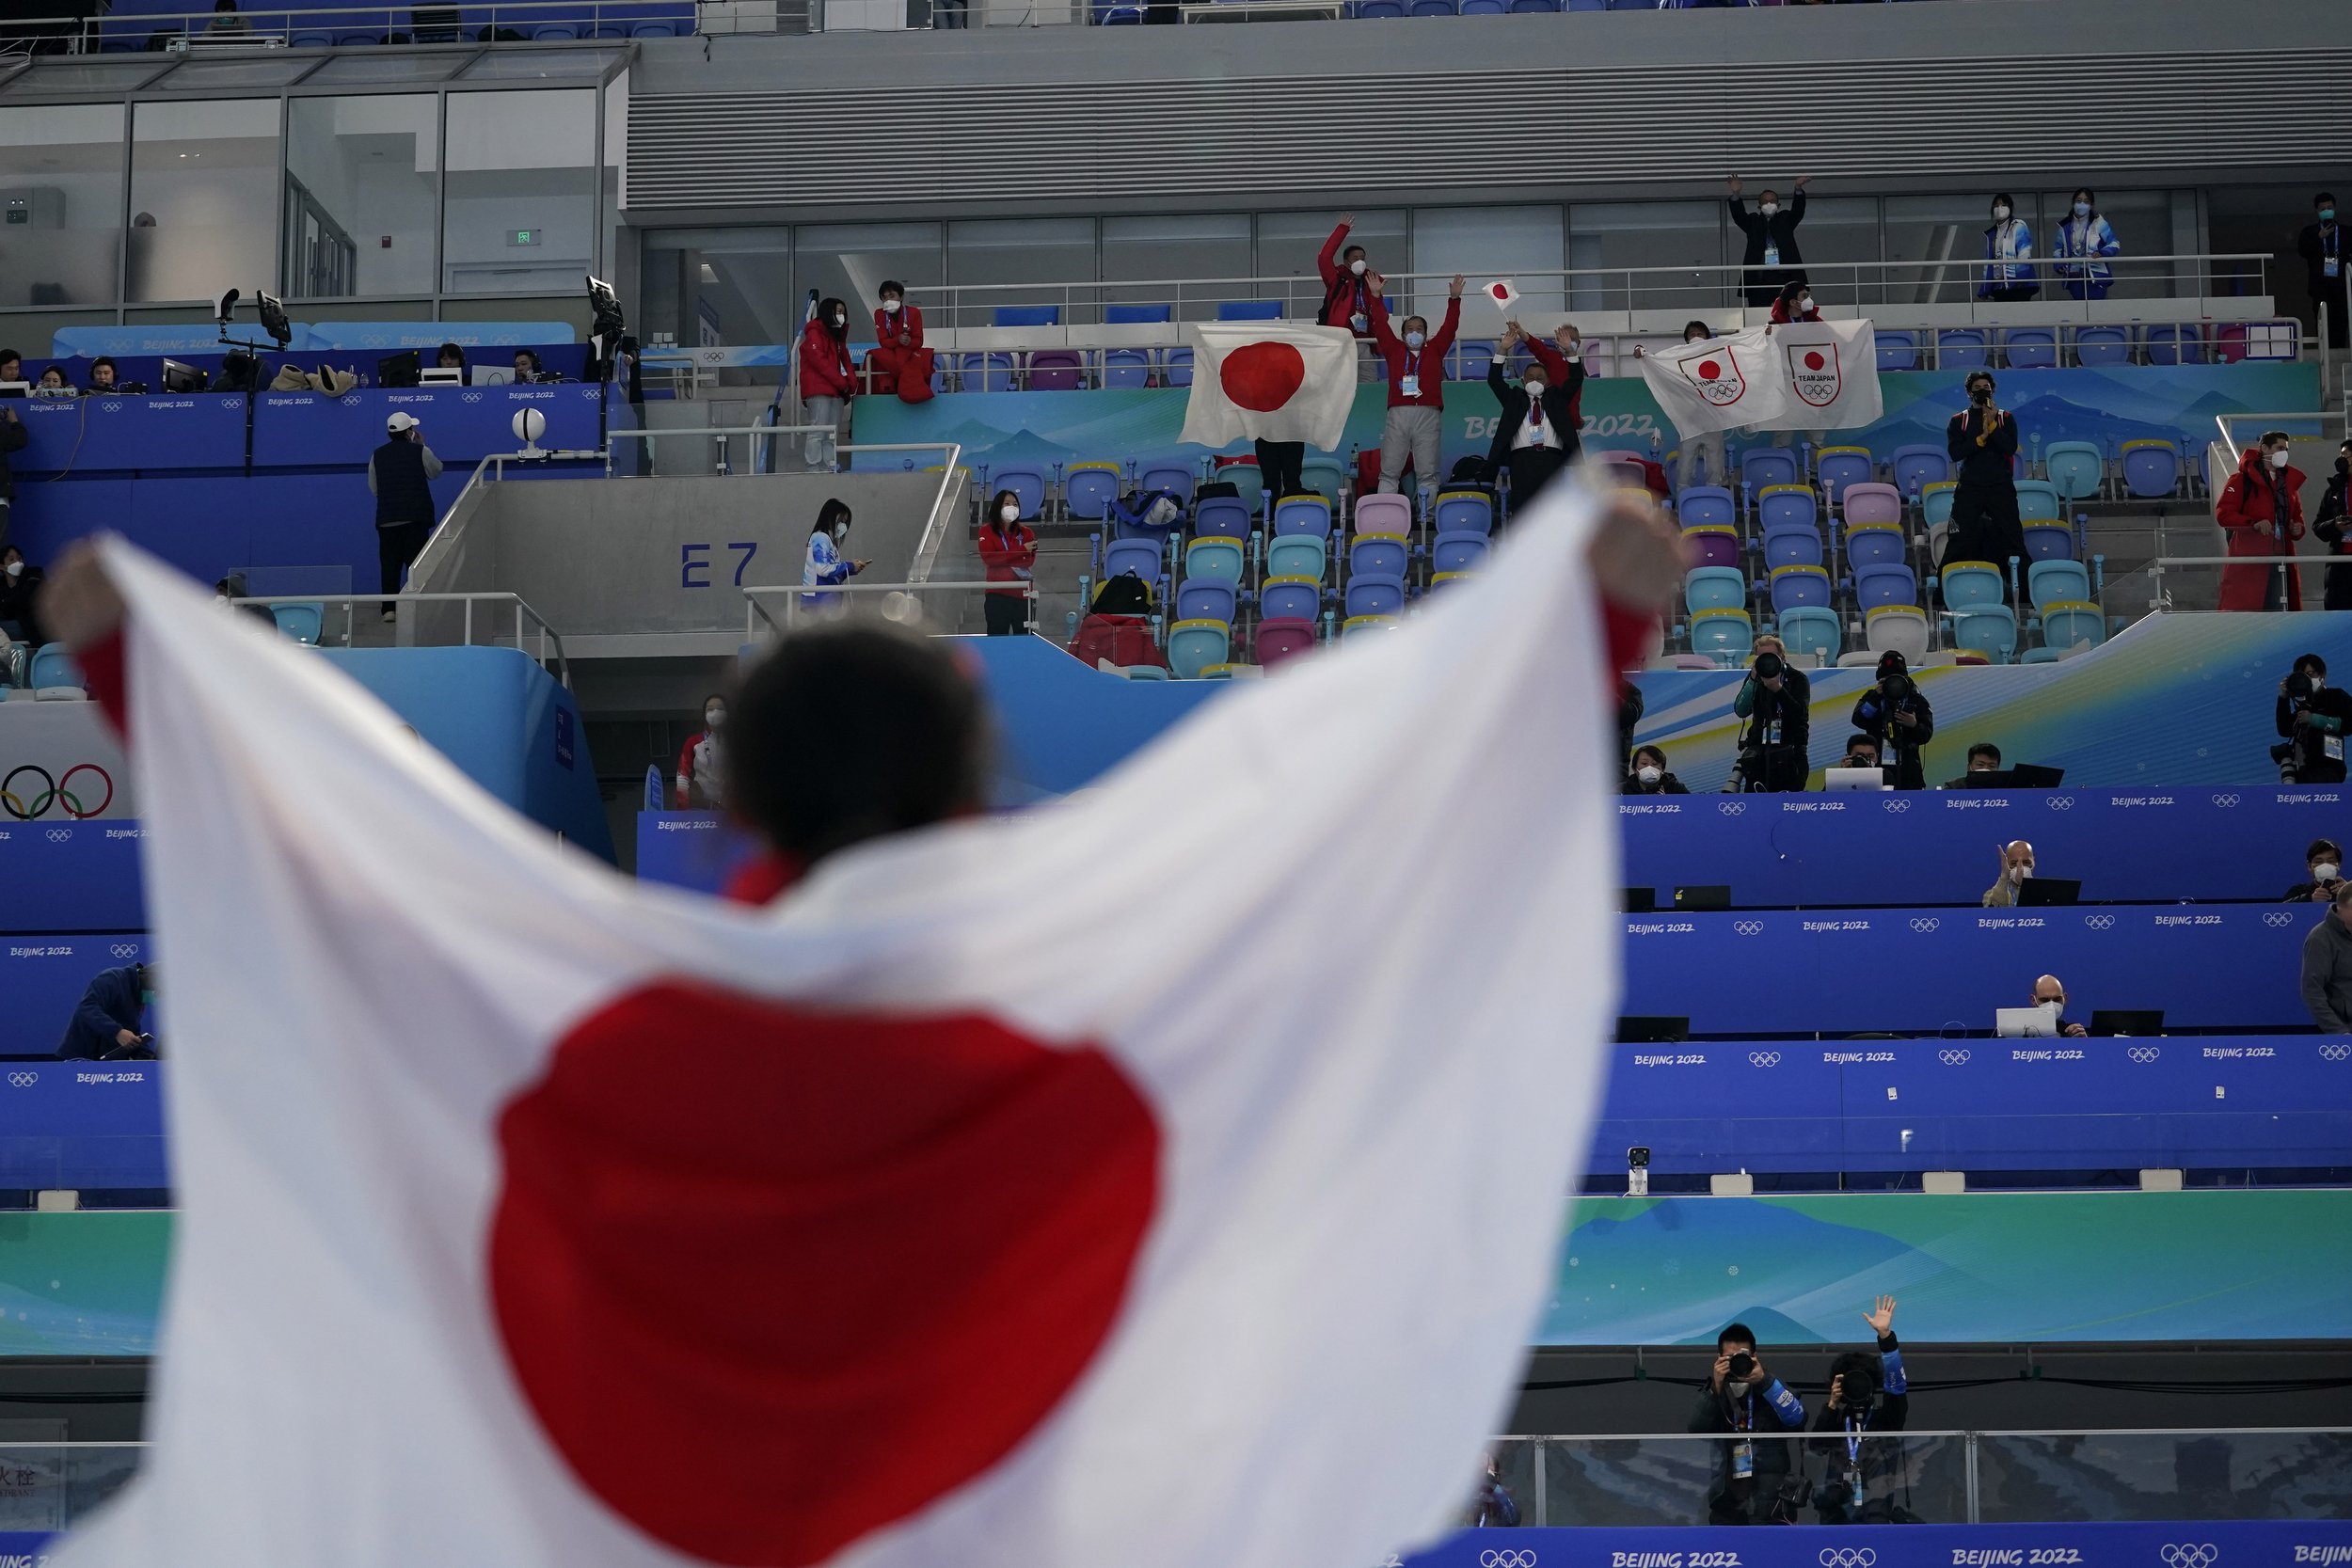  Miho Takagi of Japan holds her country's flag after winning the silver medal in the speedskating women's 500-meter race at the 2022 Winter Olympics, Sunday, Feb. 13, 2022, in Beijing. (AP Photo/Ashley Landis) 